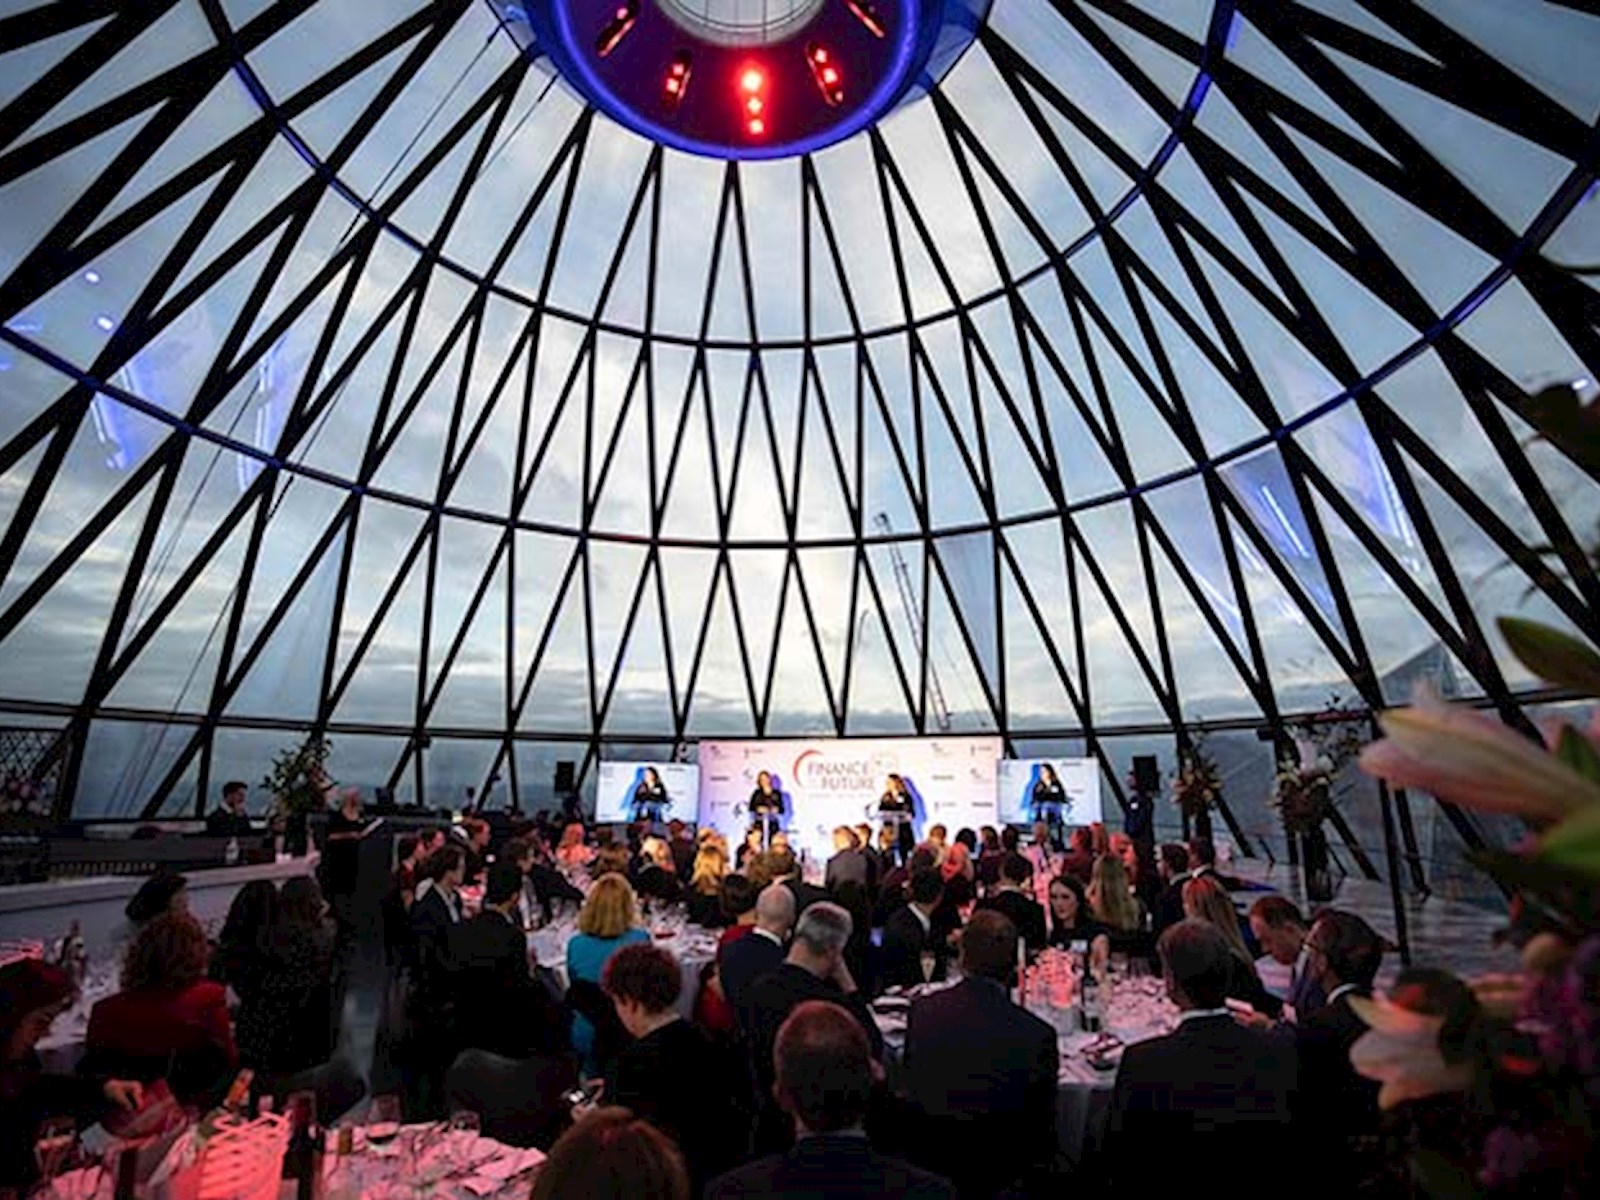 A photograph of the awards ceremony taking place inside 30 St Mary Axe.